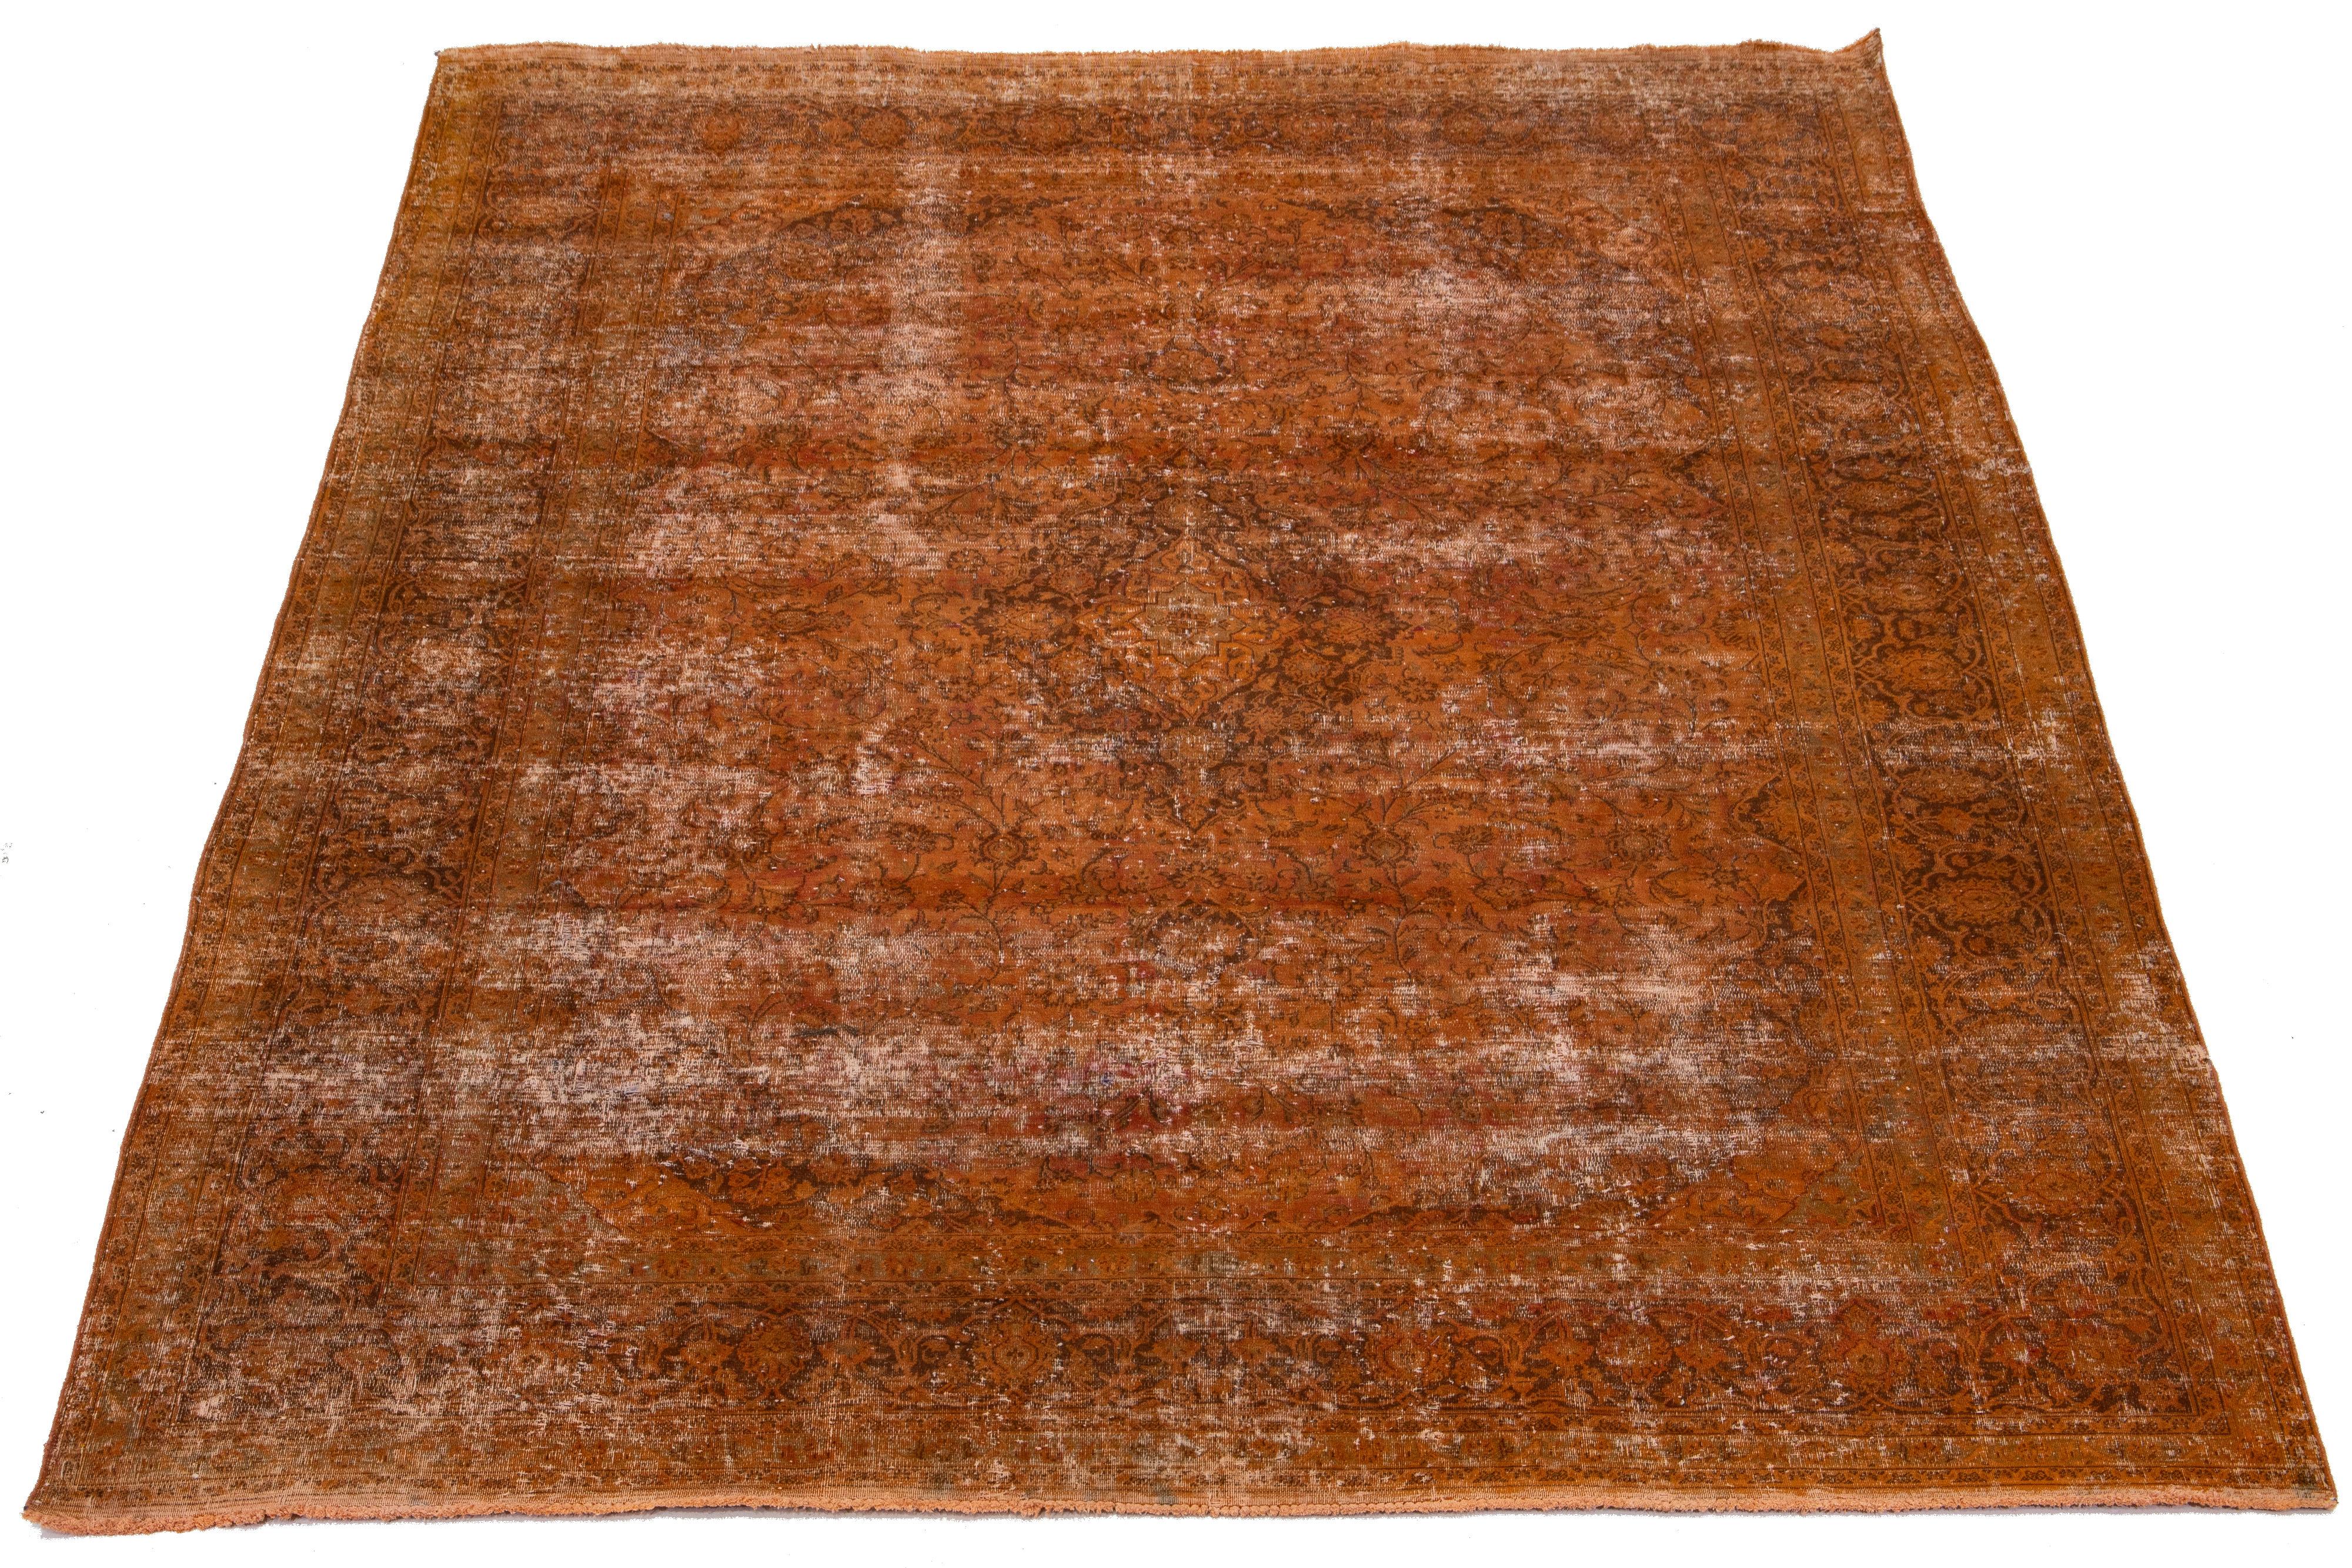 This orange, antique, hand-knotted Persian wool rug has a medallion floral design with brown and beige accents.

This rug measures 9'9'' x 12'6